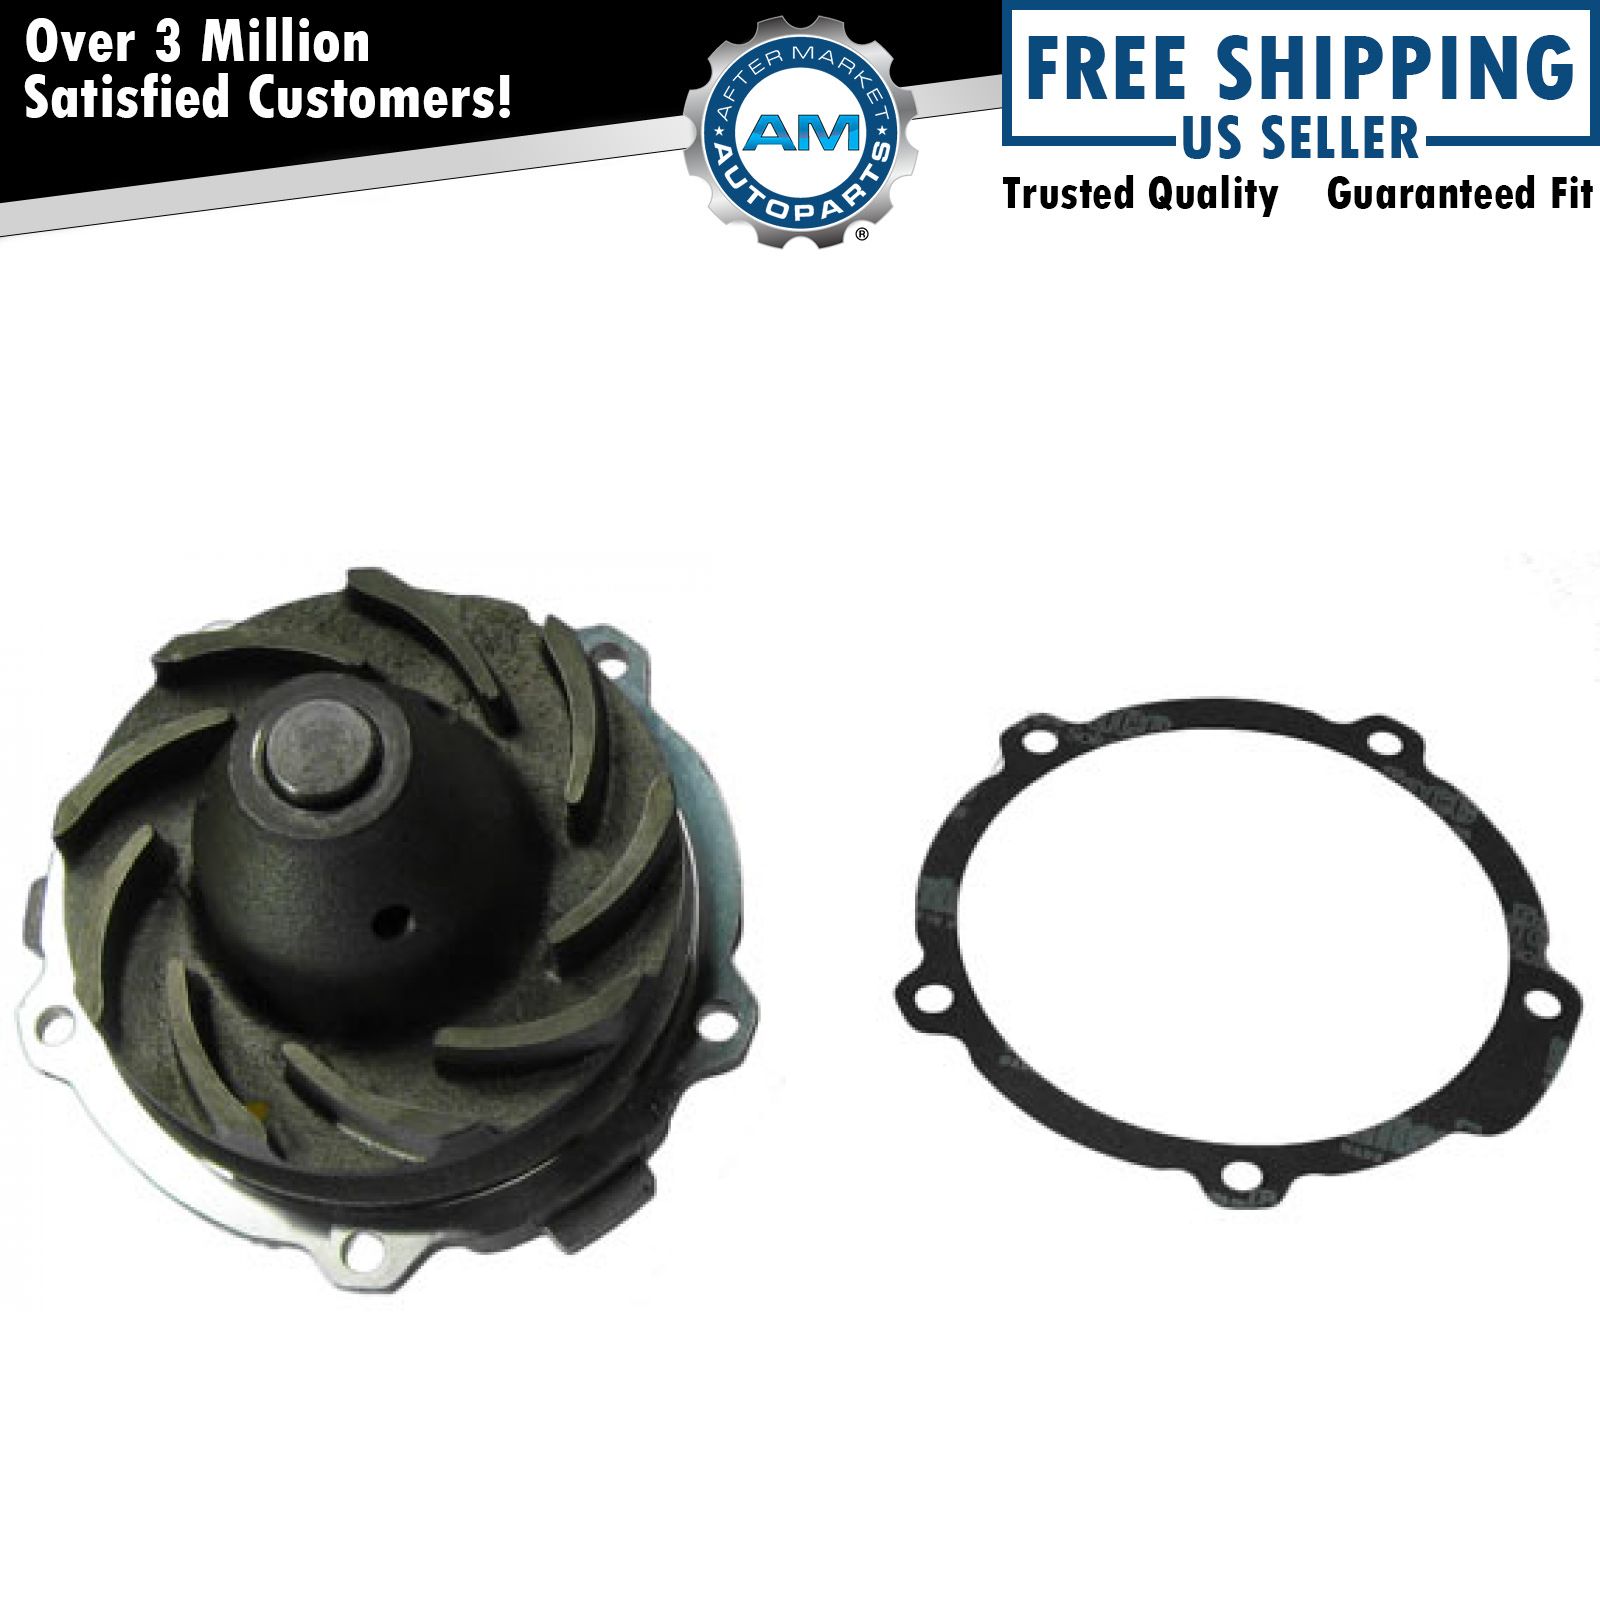 AC DELCO 252-721 Water Pump for Chevy Pontiac Saturn Cadillac Buick Olds V6